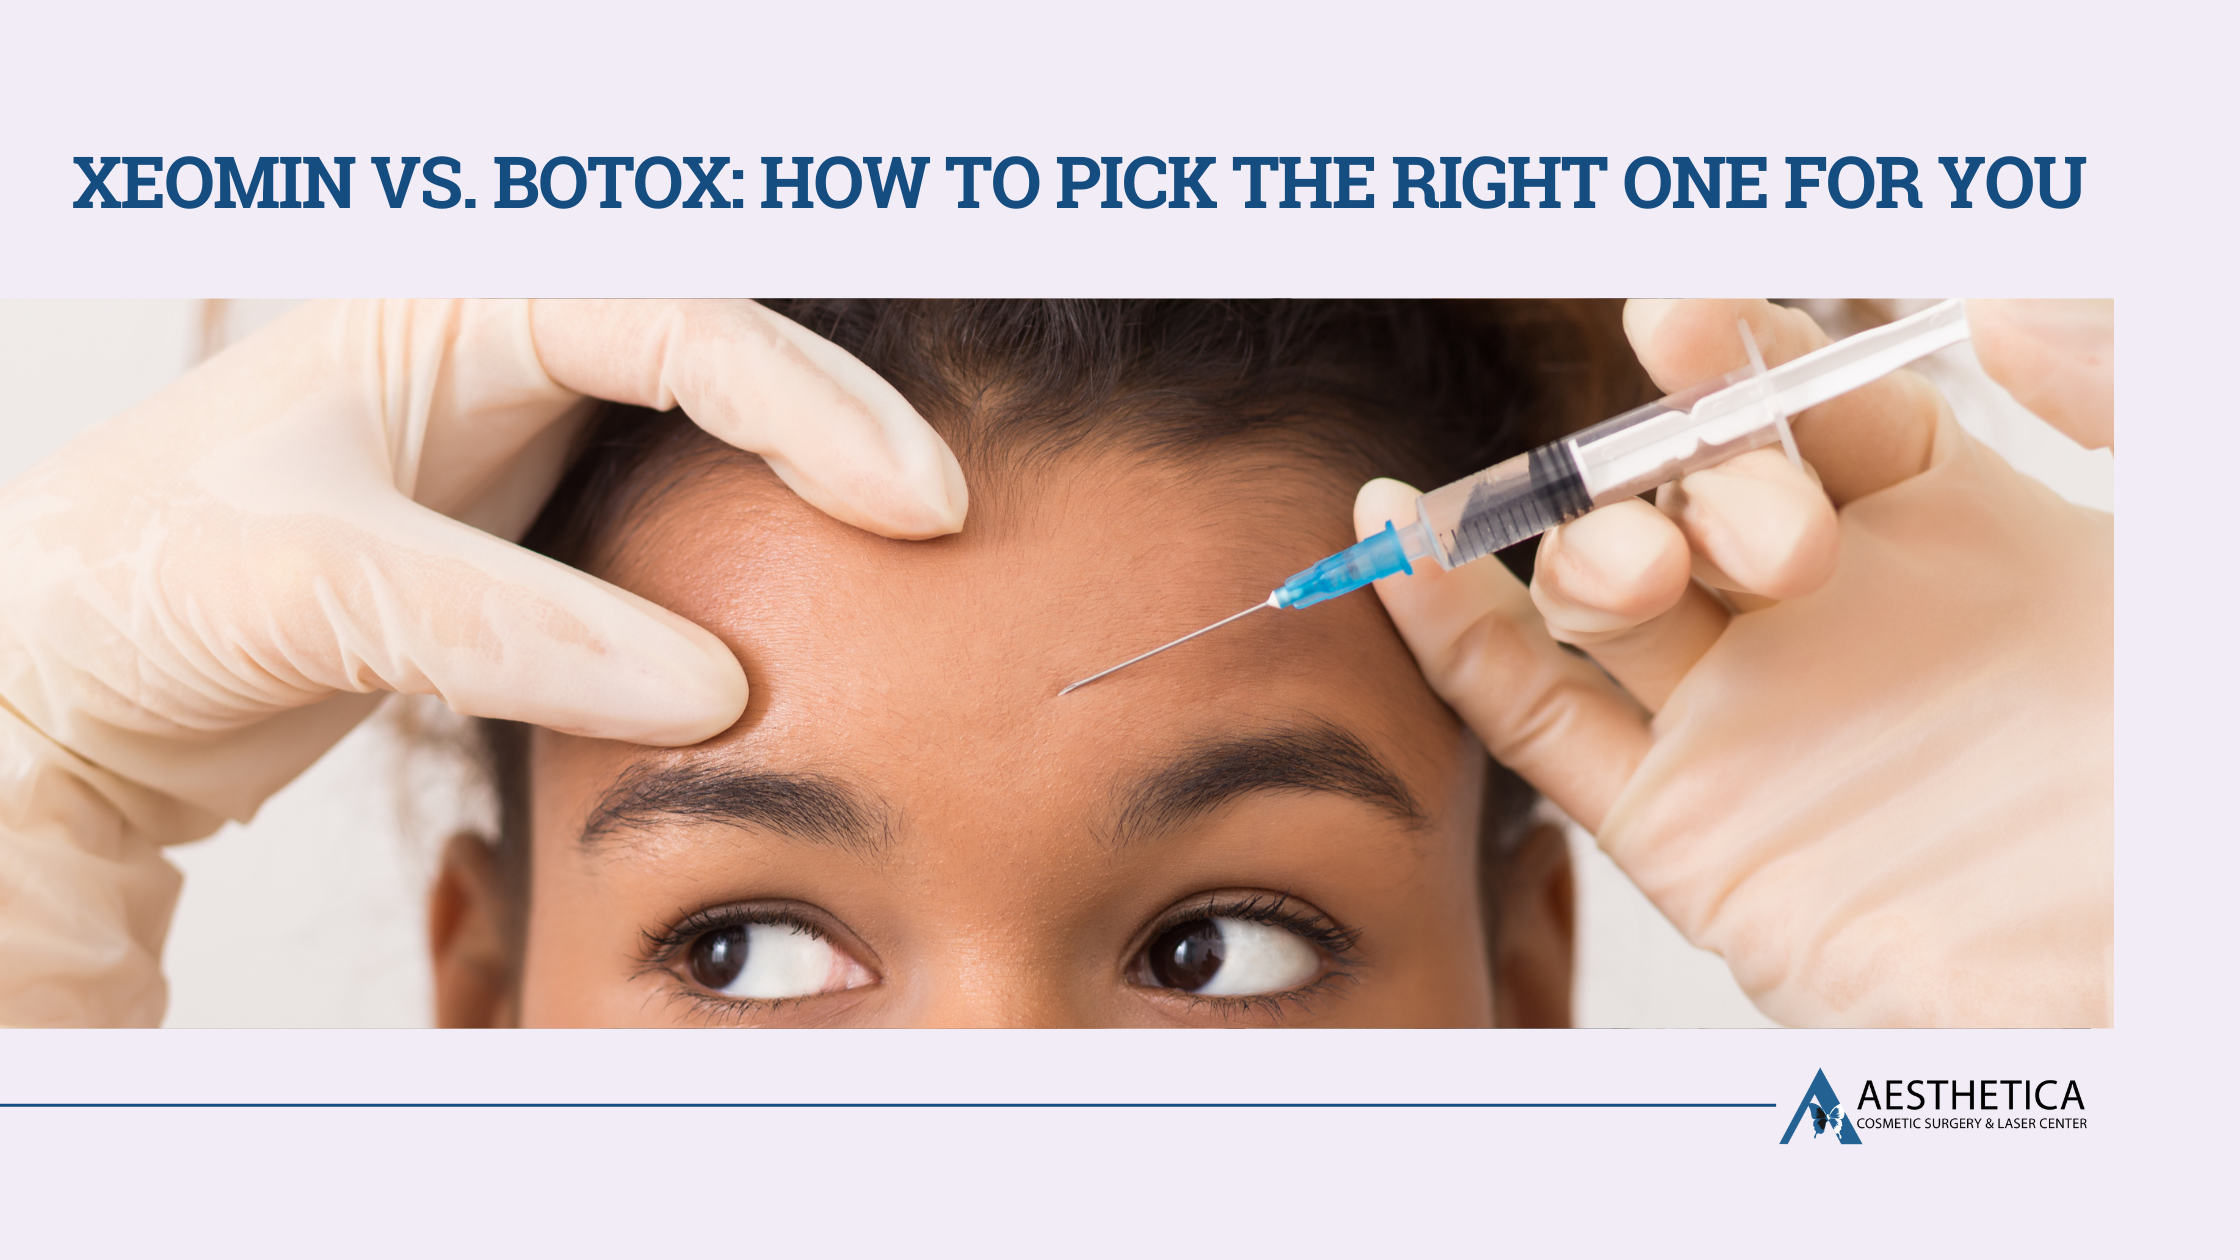 Xeomin vs. BOTOX: How to Pick the Right One for You